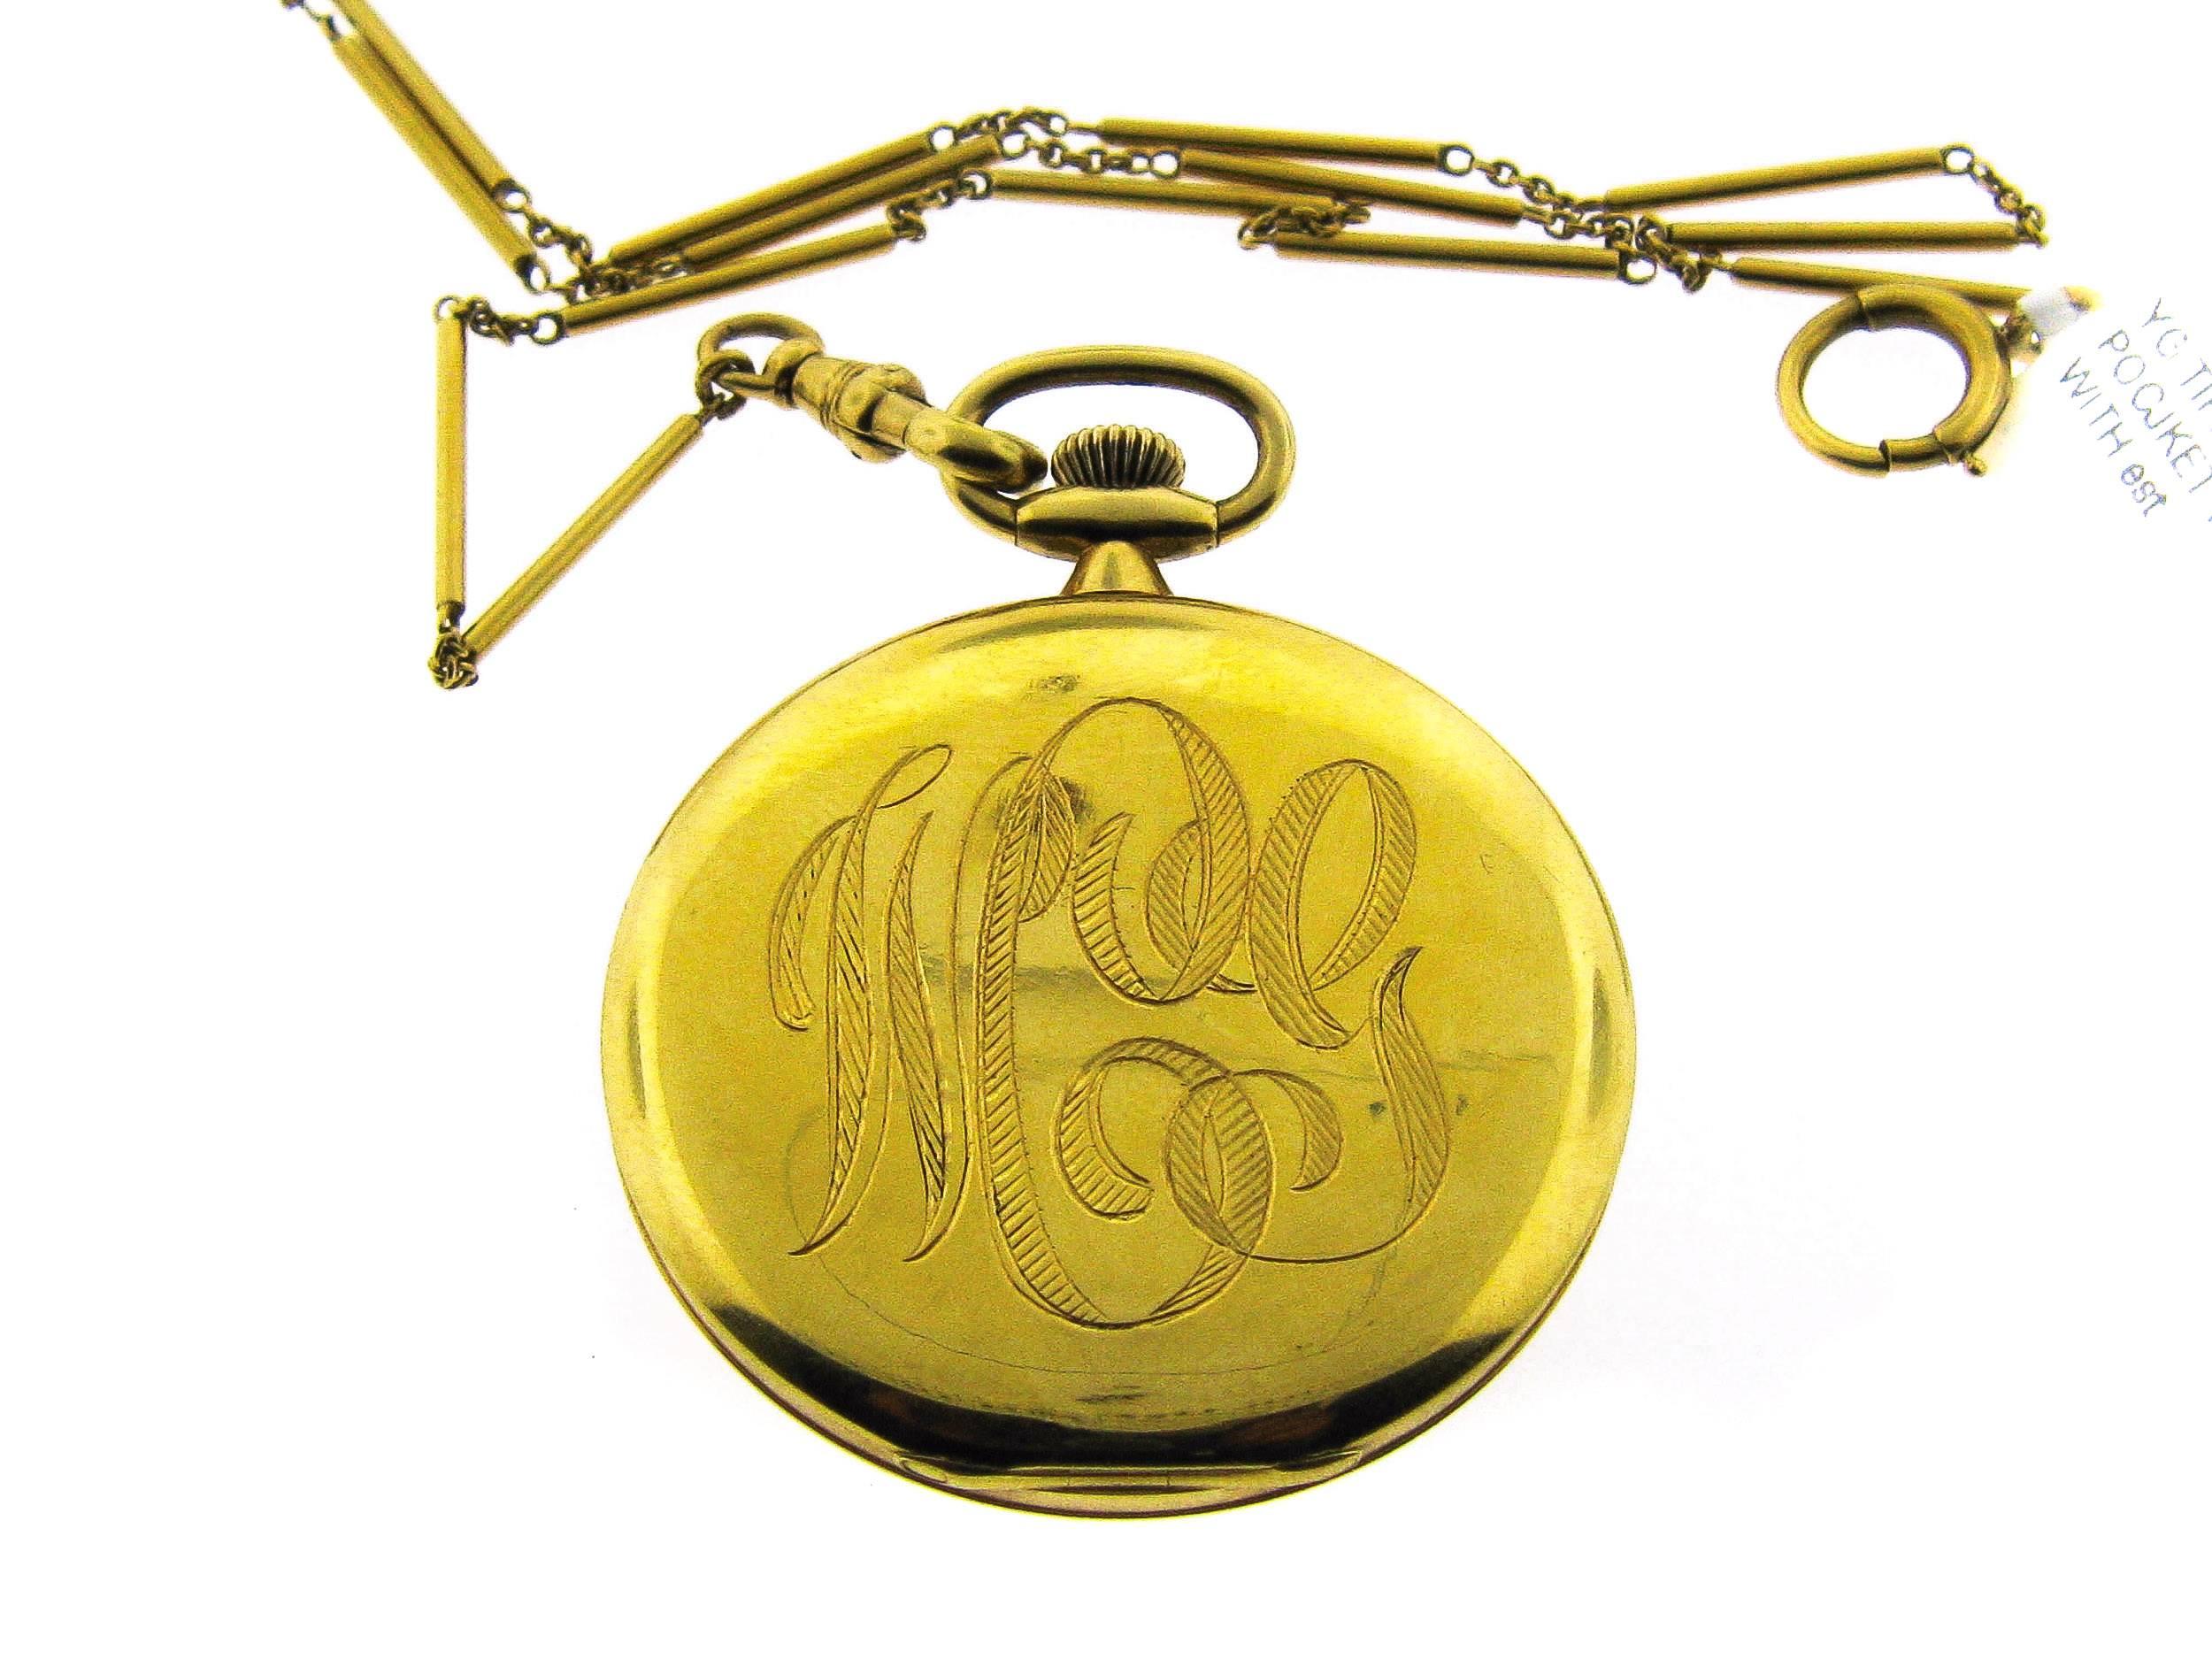 Neoclassical 18 Karat Yellow Gold Tiffany & Co. Pocket Watch with Chain